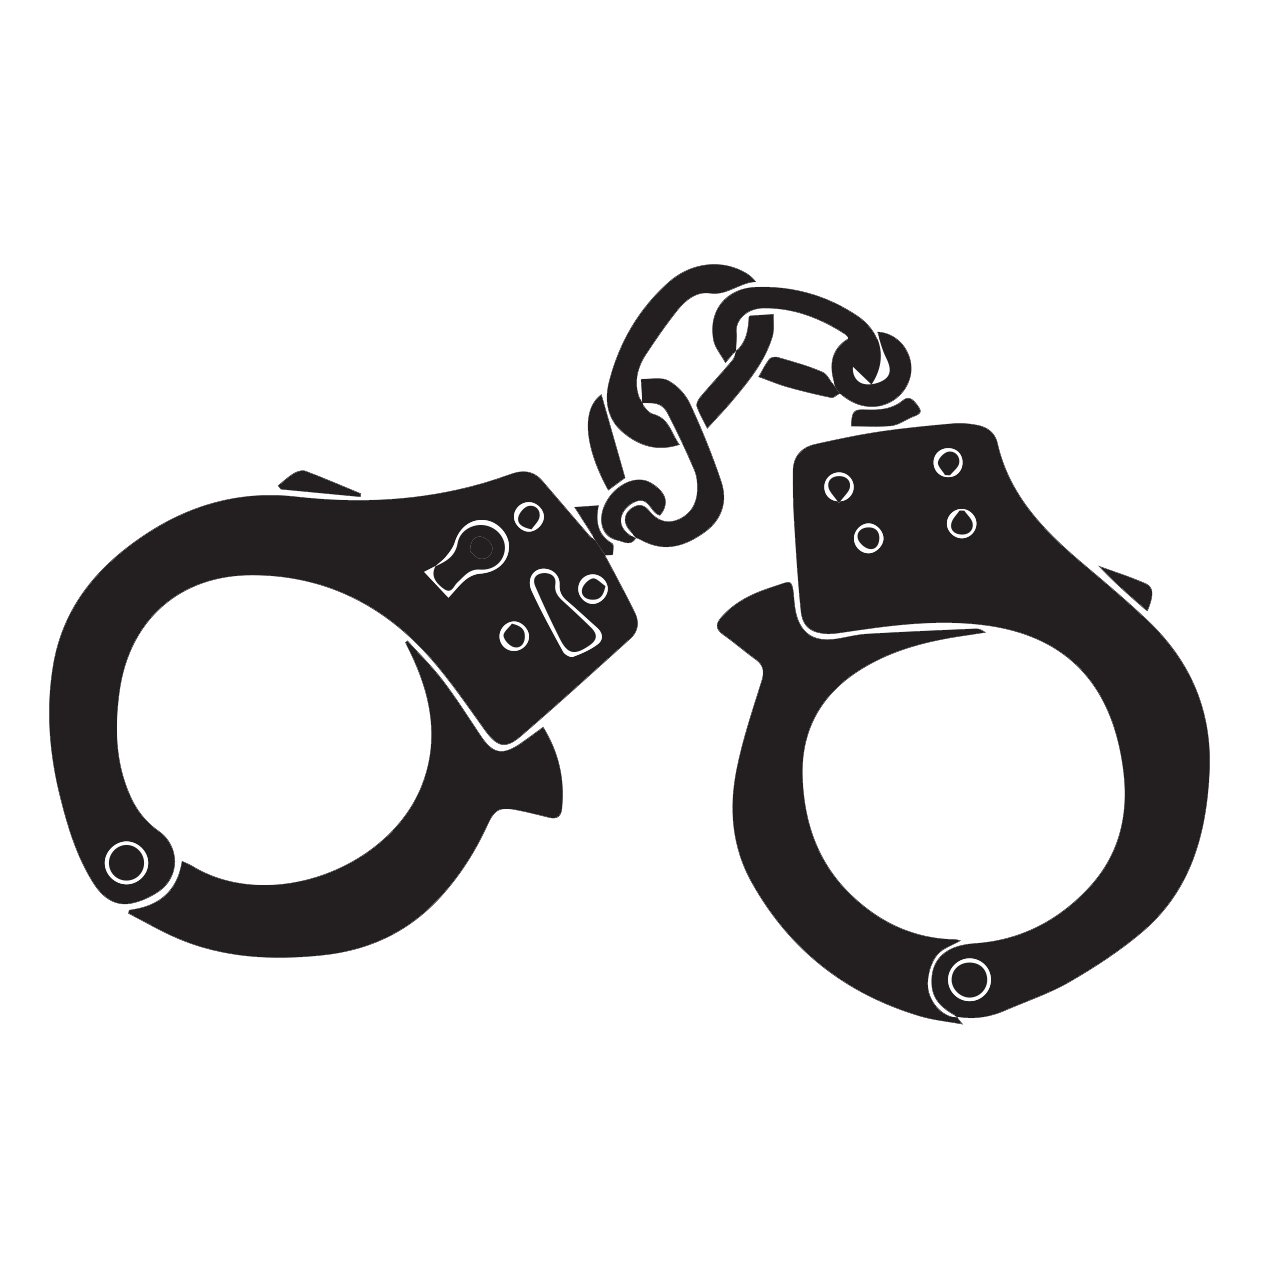 Handcuff clipart tool. Handcuffs police officer clip